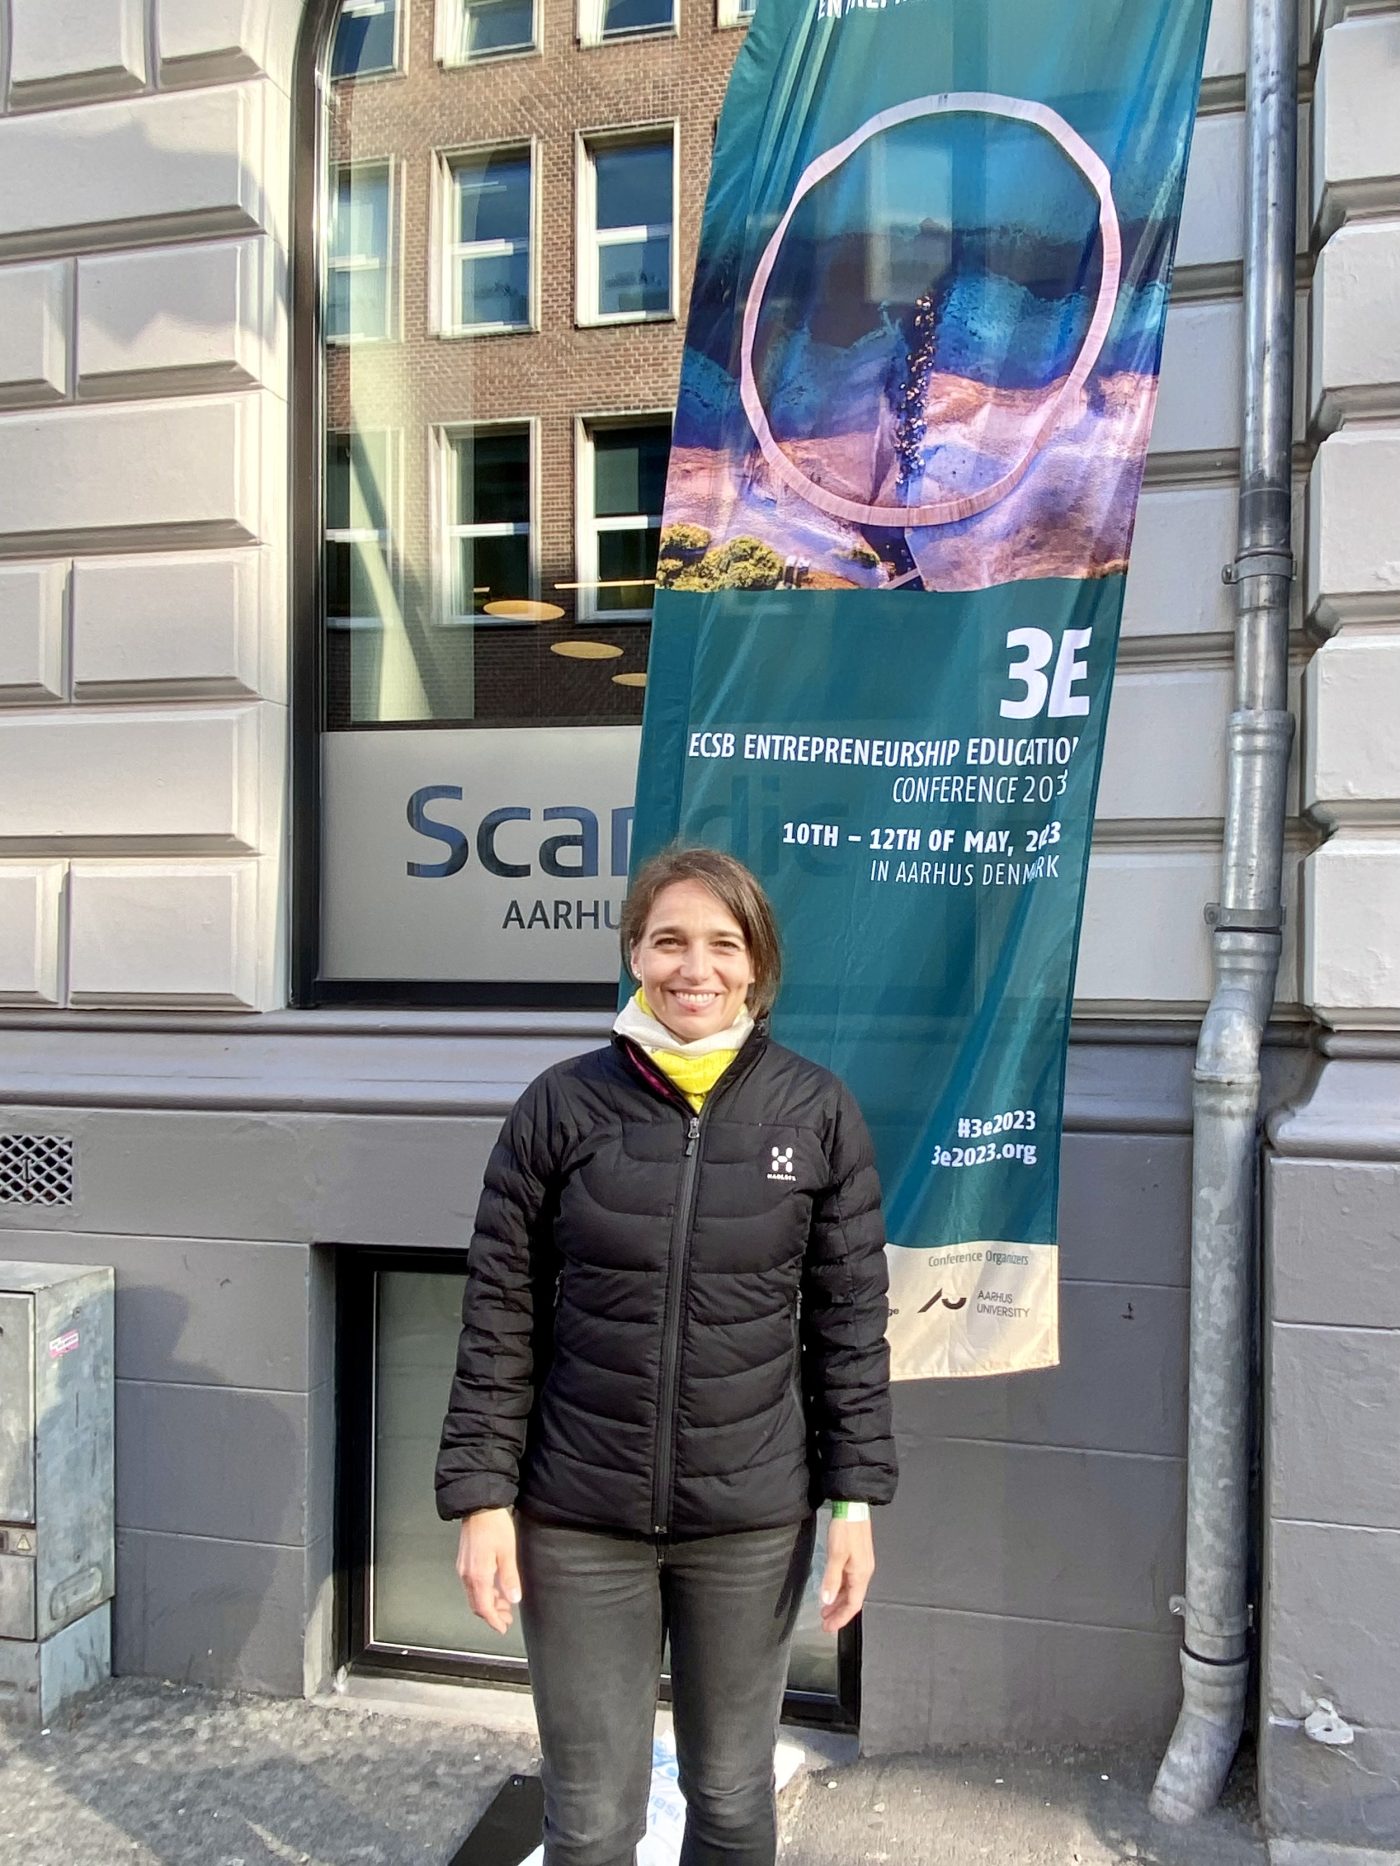 Dr. Barbara Wolf, lecturer at Munich Business School, in front of the 3E 2023 Conference display in Aarhus, Denmark.